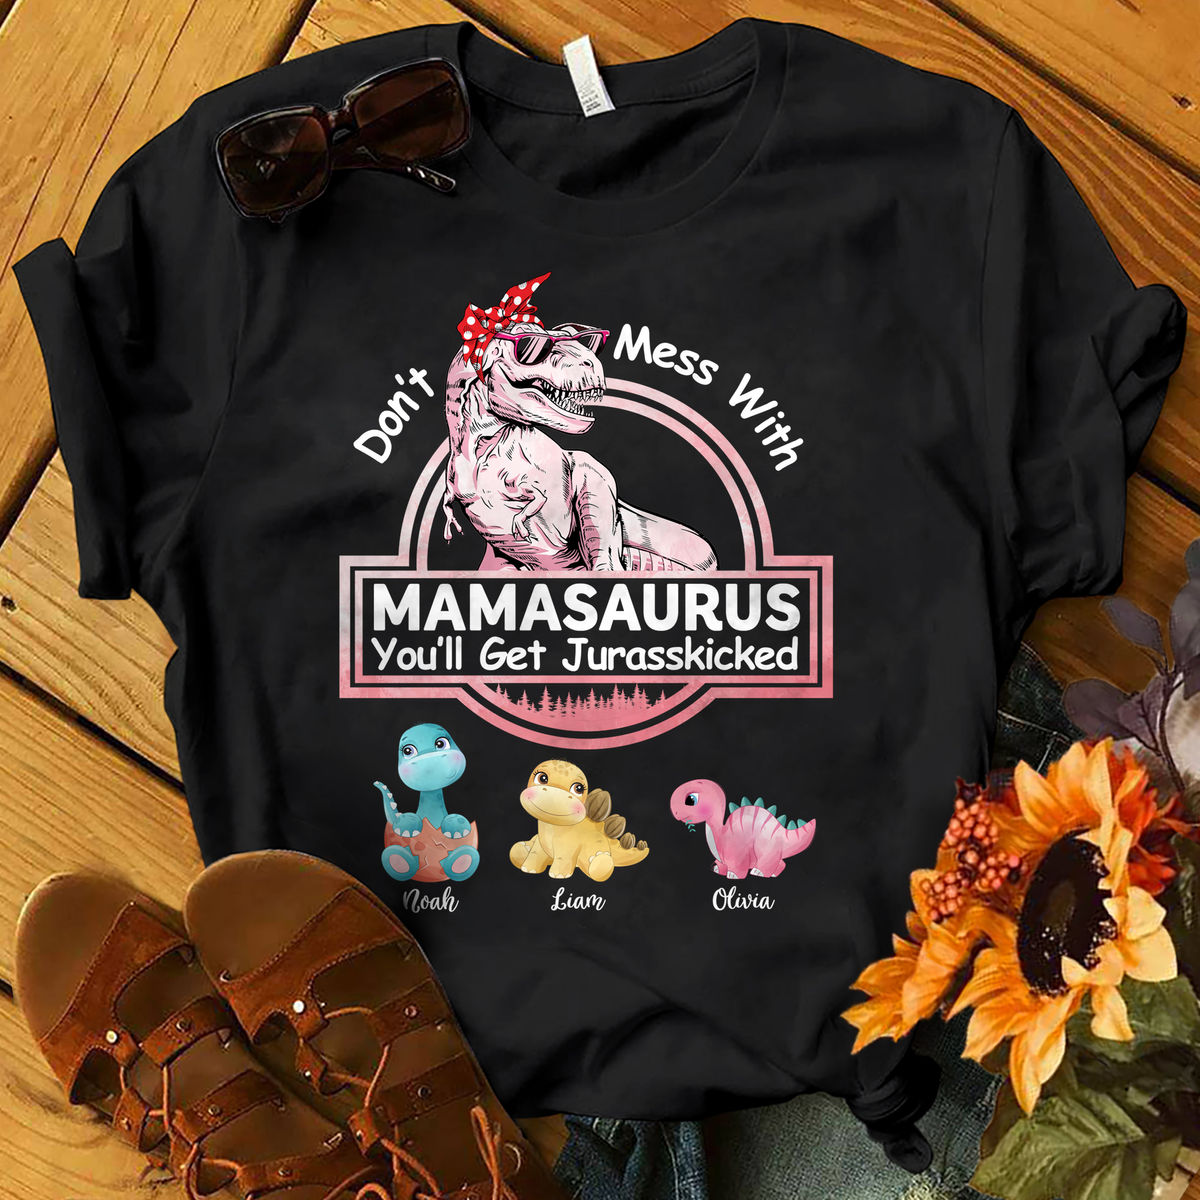 Personalized Shirt - Family - Don't Mess With Mamasaurus - Black_2